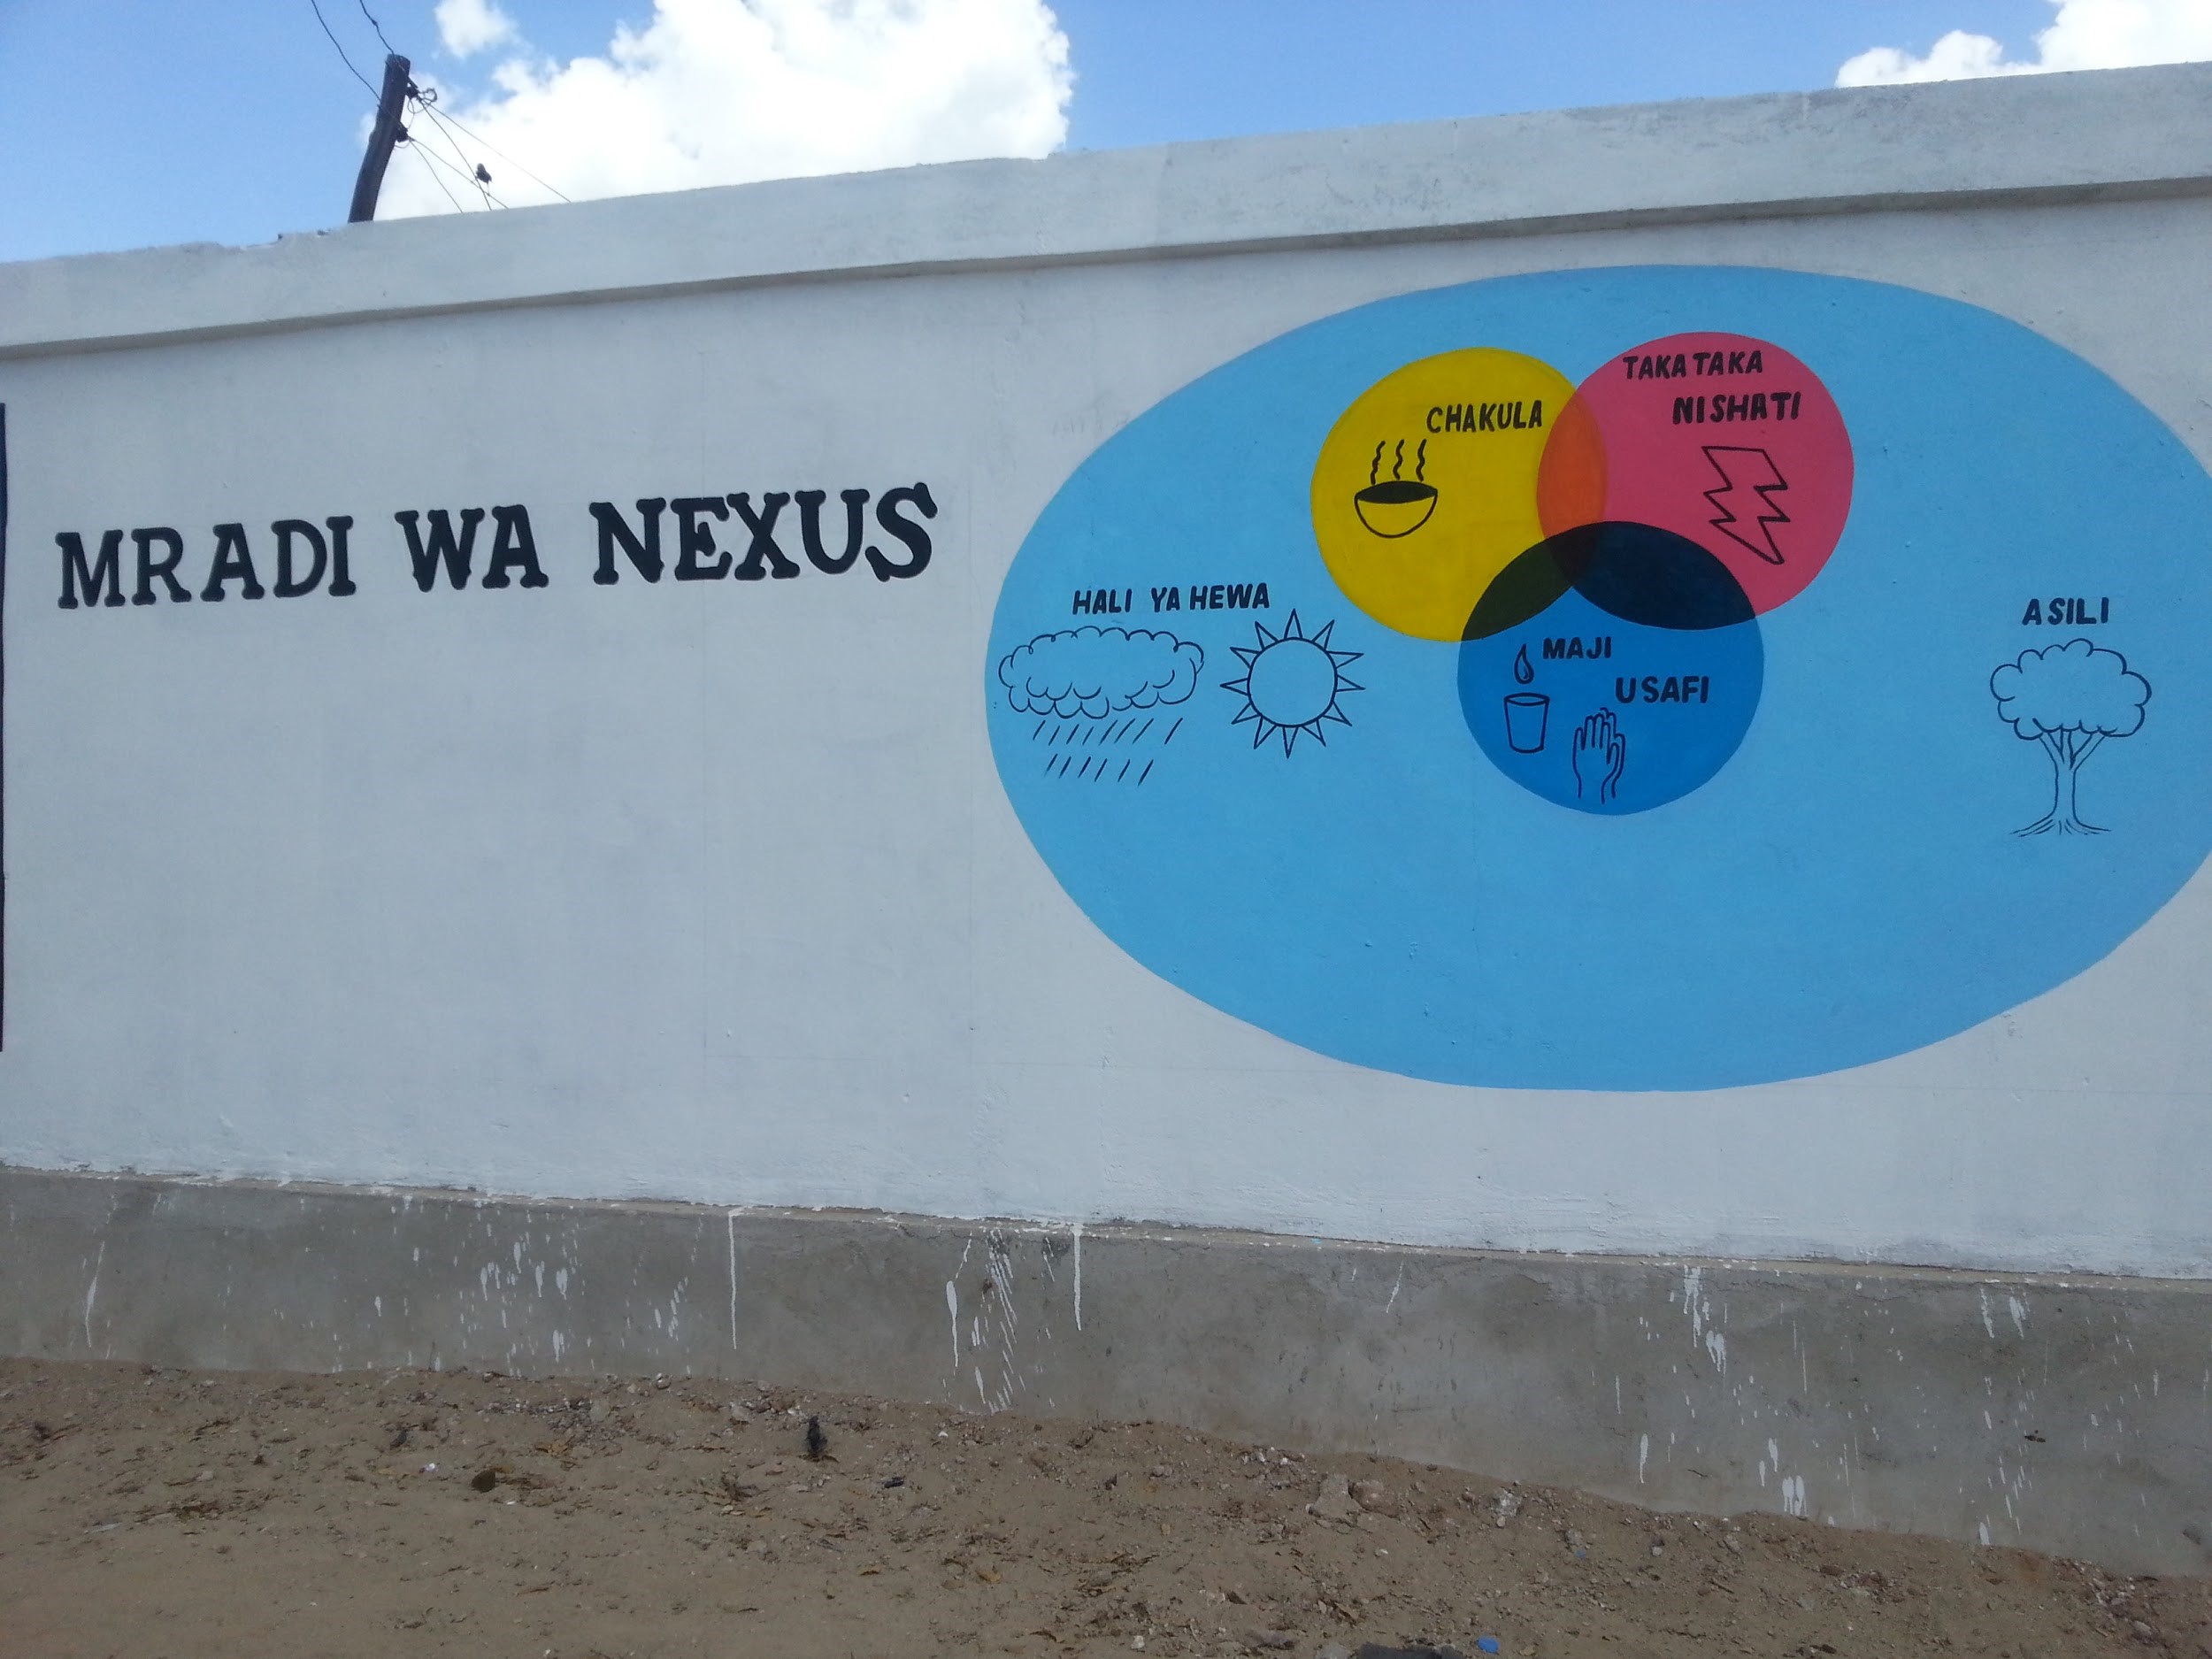 A mural painted on the wall between the two schoolyards celebrates the local environment and highlights the project’s goals for improving energy efficiency and enhancing students’ access to clean water and nutritious food. Photo credit: Sarah Birch